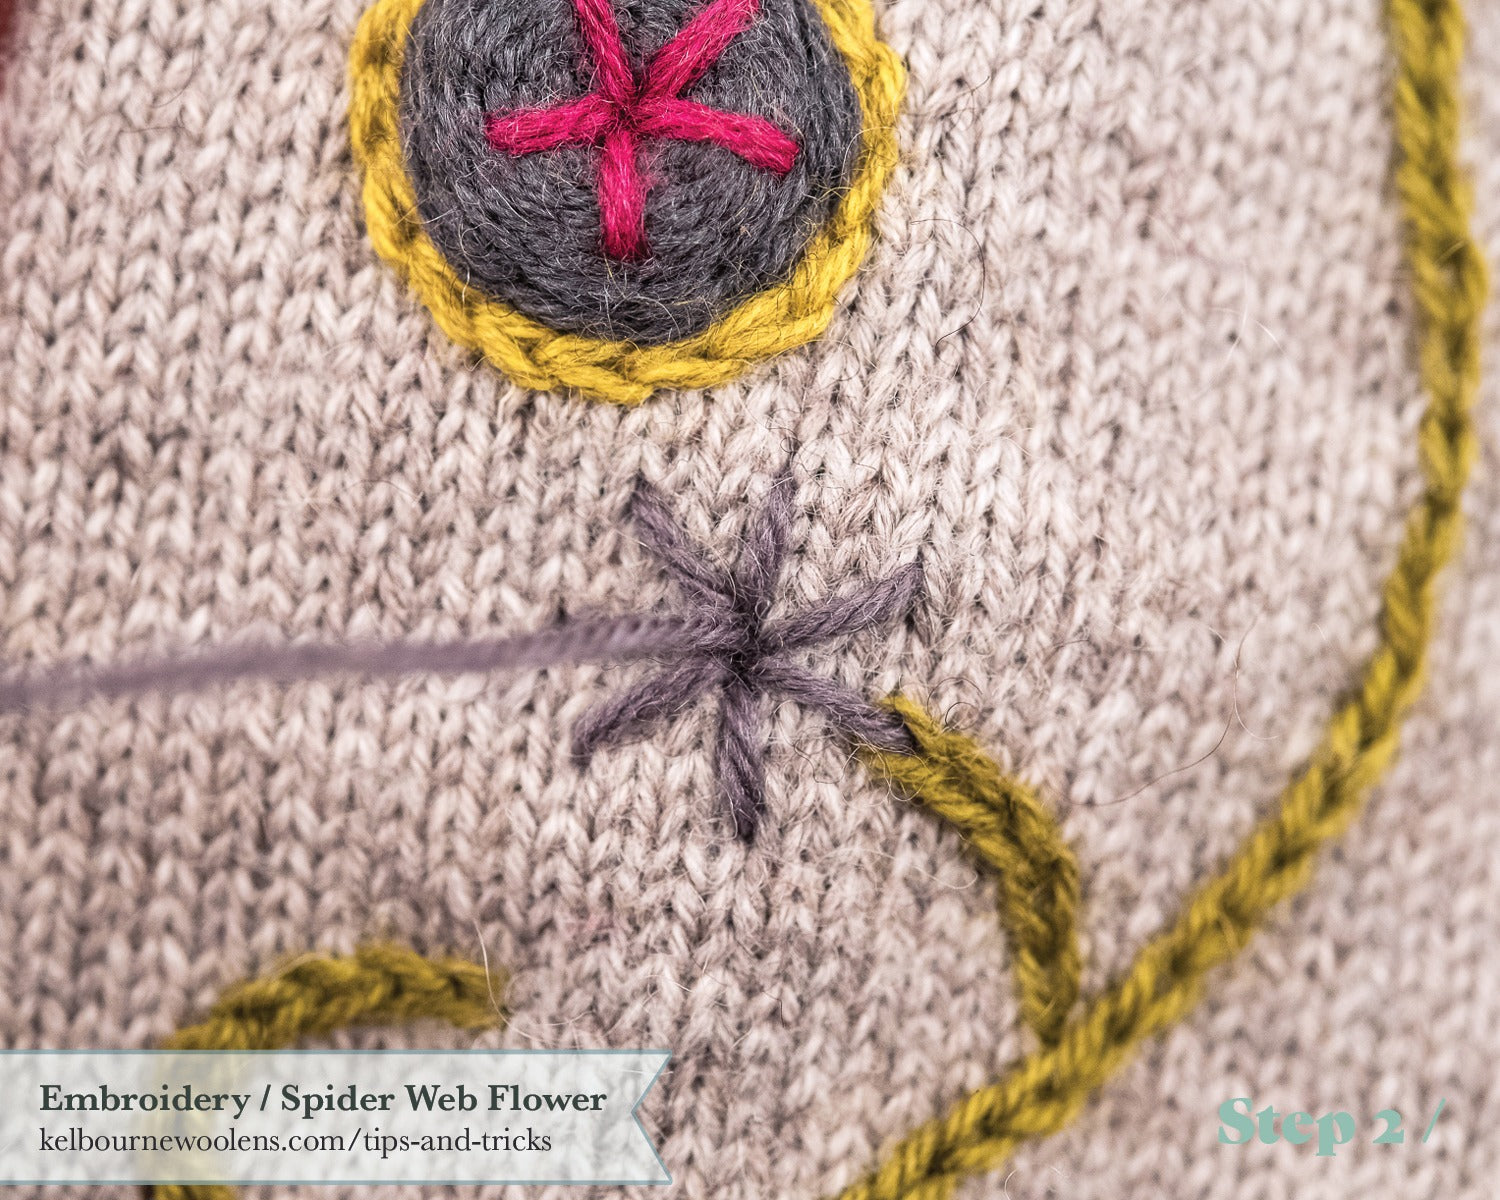 Embroidering on Knitting - Kelbourne Woolens